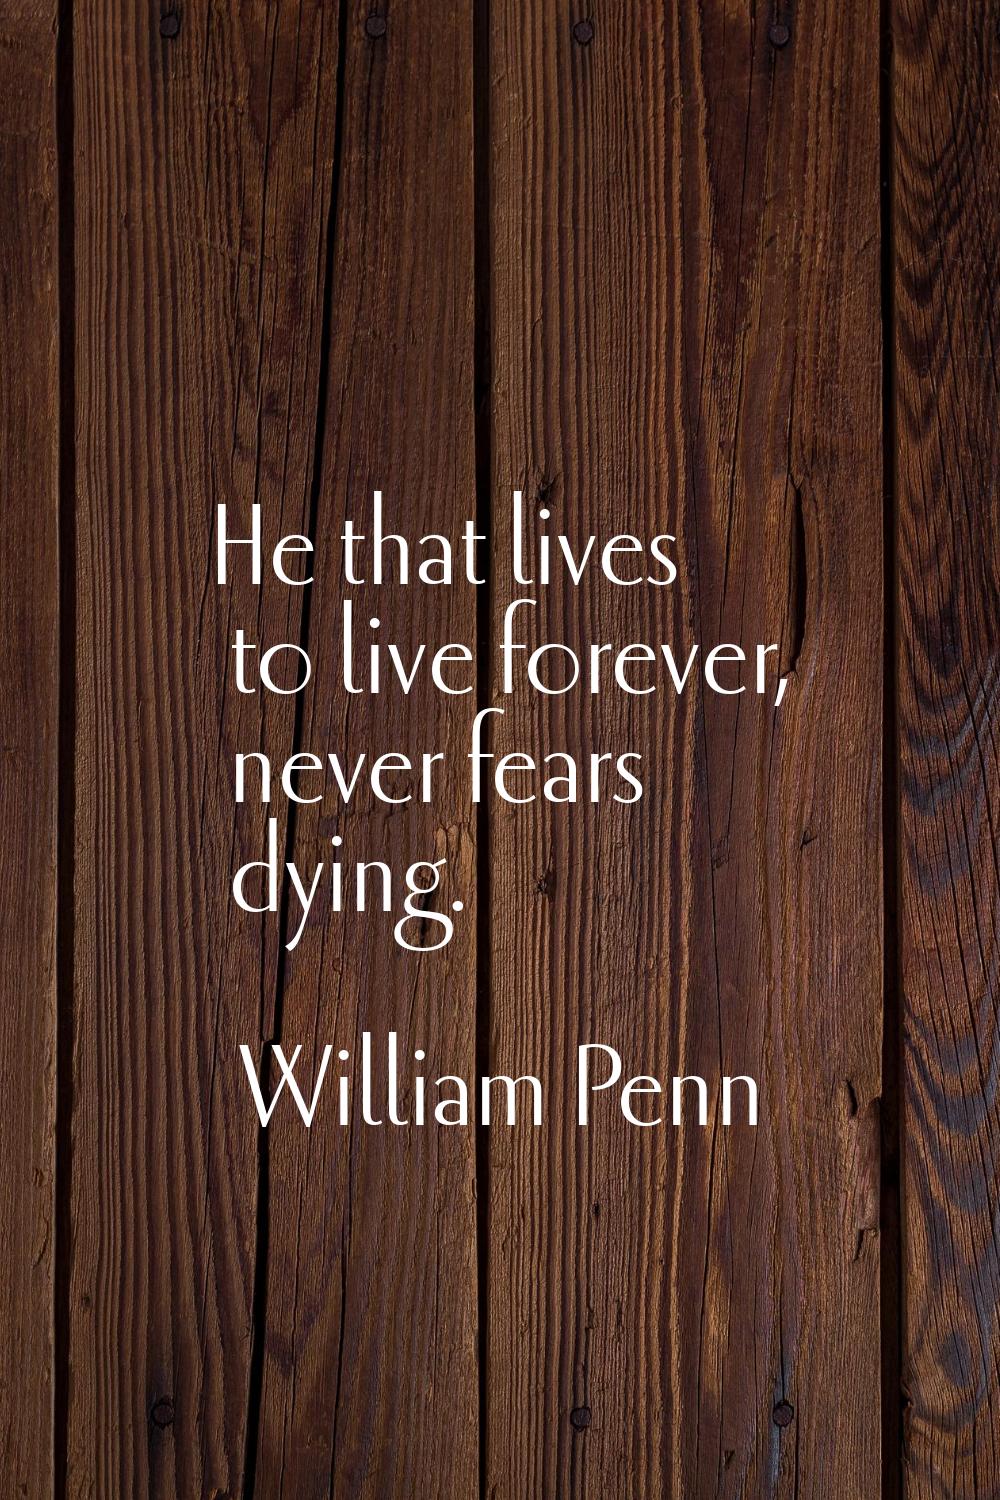 He that lives to live forever, never fears dying.